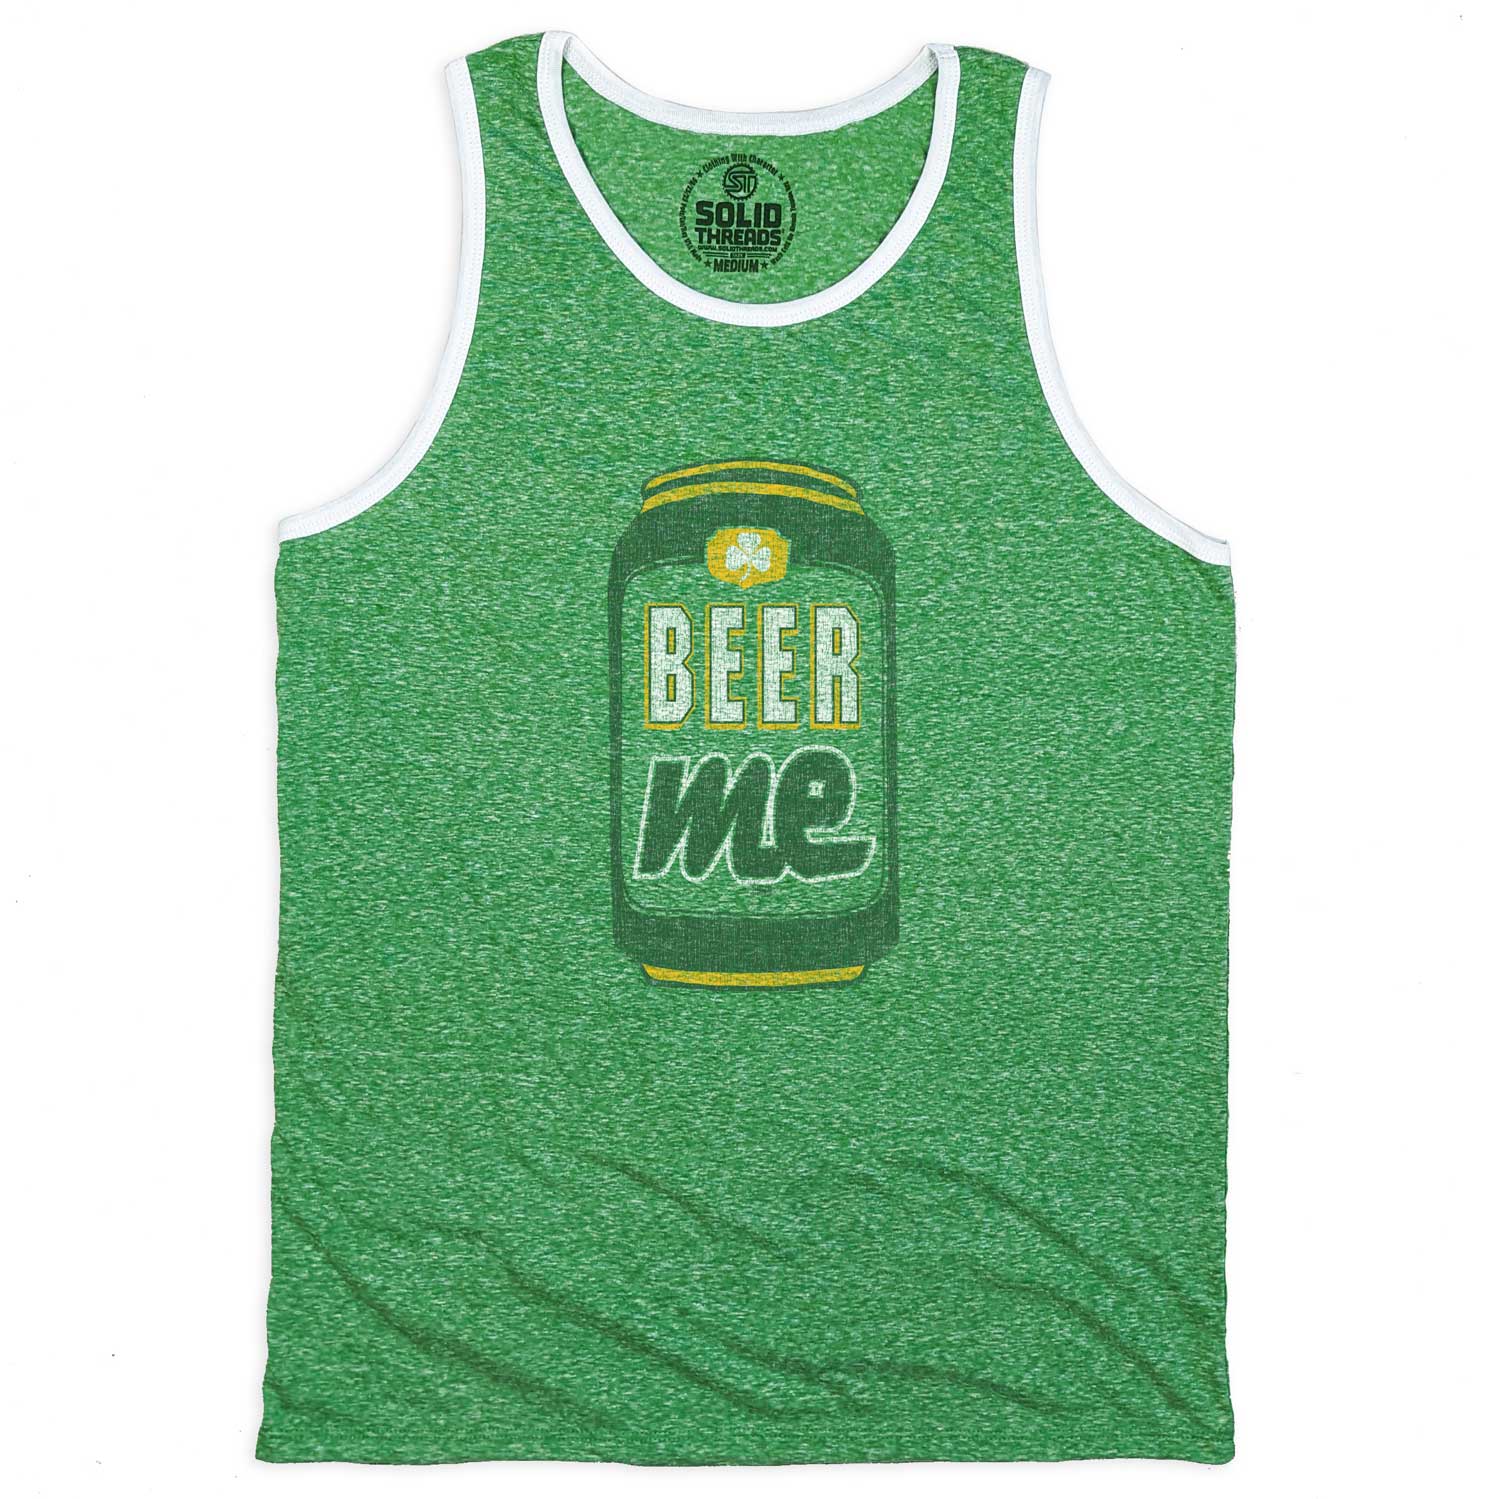 Men's Beer Me Vintage Graphic Tank Top | Funny Drinking T-shirt | Solid Threads